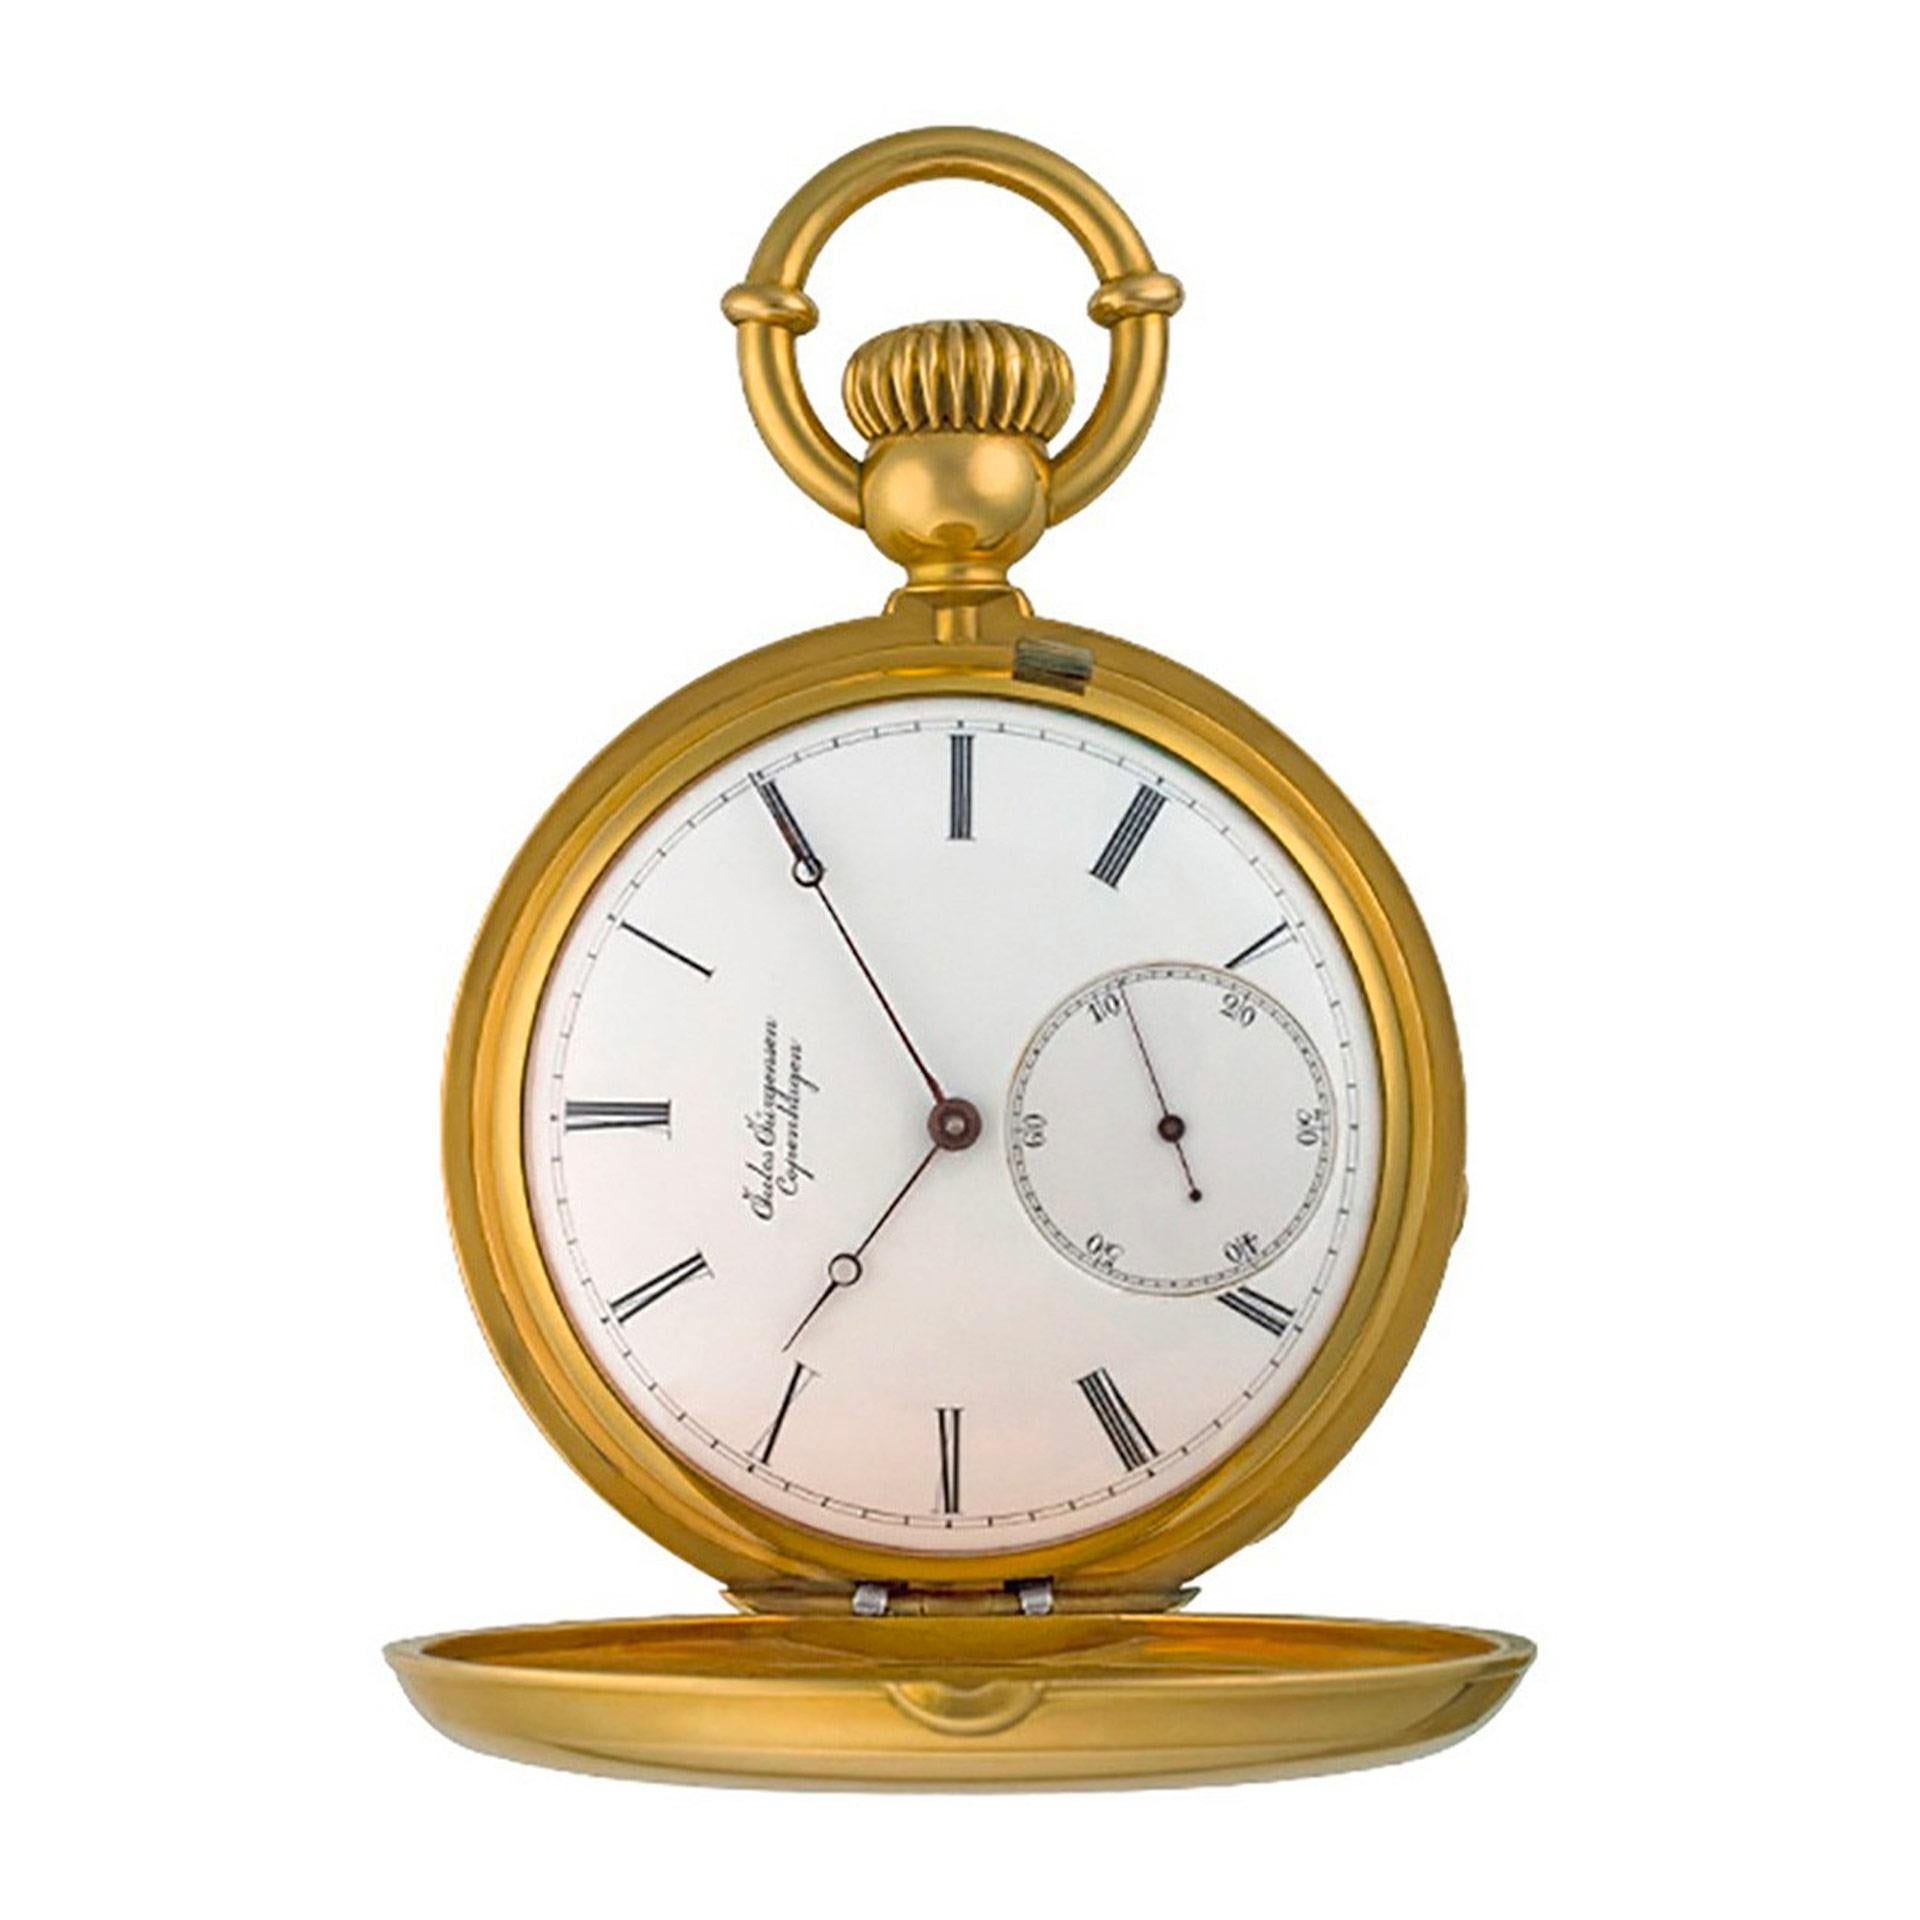 Jules Jurgensen Copenhagen hunter case pocket watch 17 jewels, porcelain dial and moon hands. in 18k pink gold. Monogrammed on one side - high polish finish on the other. 51mm case size. Manual with subseconds. Circa 1885. Fine Pre-owned Jules